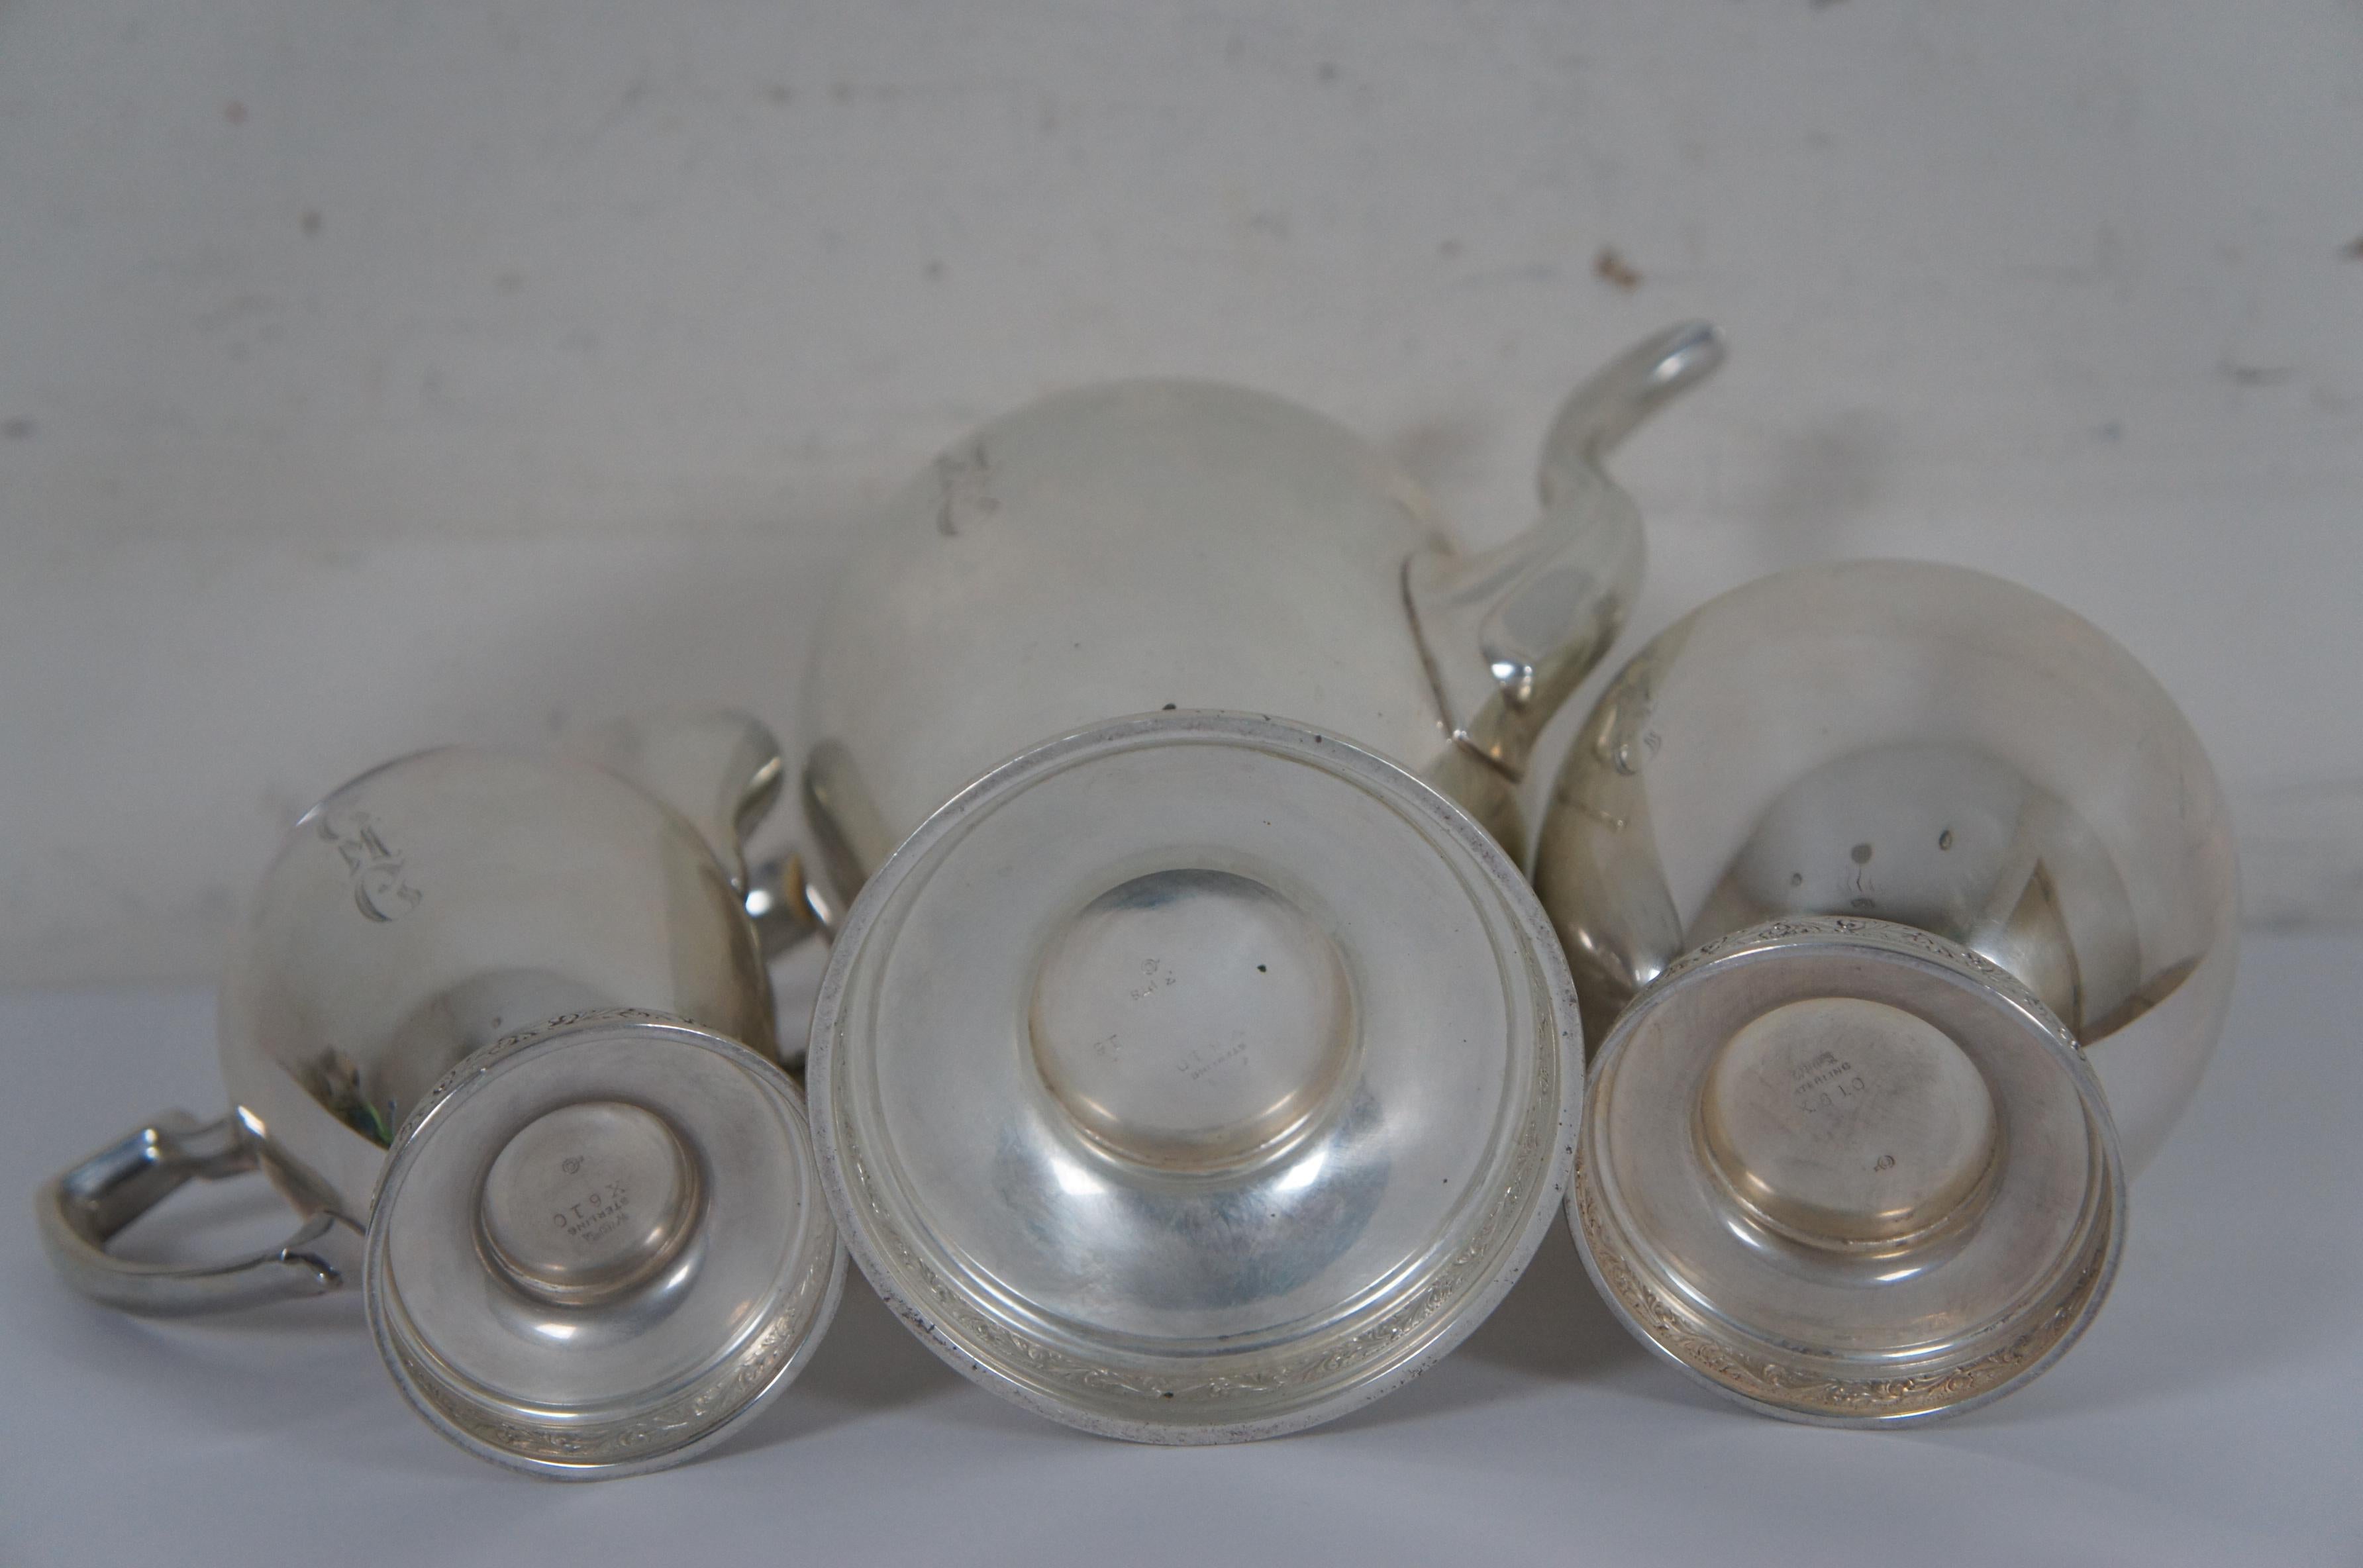 1936 Antique 3pc Reed & Barton X610 Sterling Silver Tea Coffee Serving Set 1194g For Sale 2